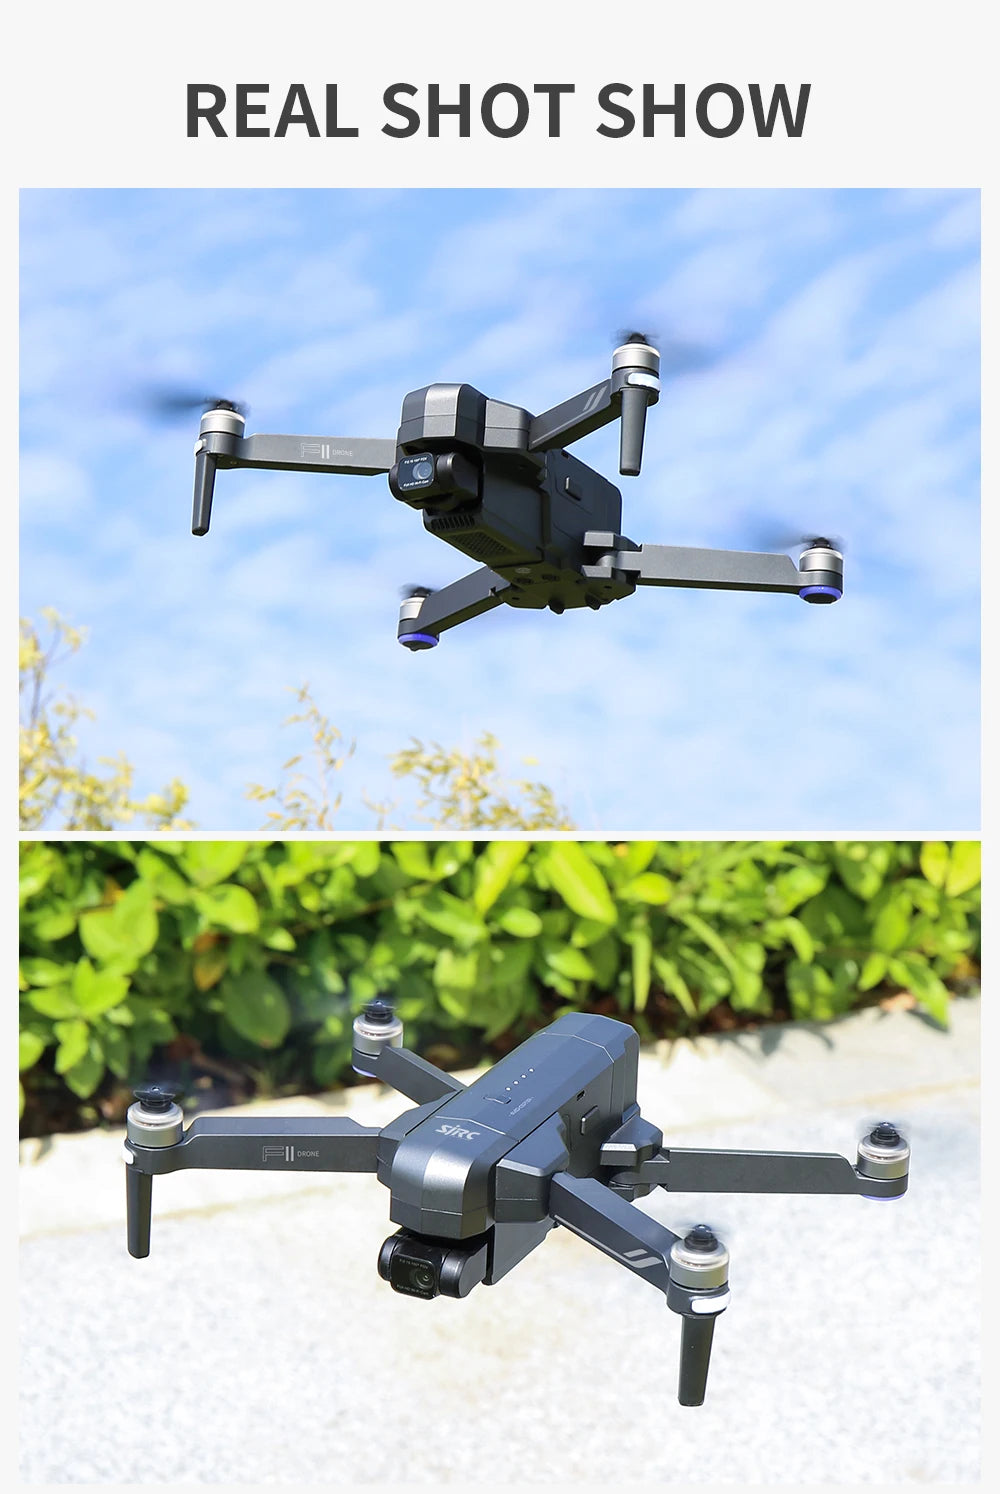 F11S PRO Drone, the operation time and distance of the two types of drones are different . the appearance patterns